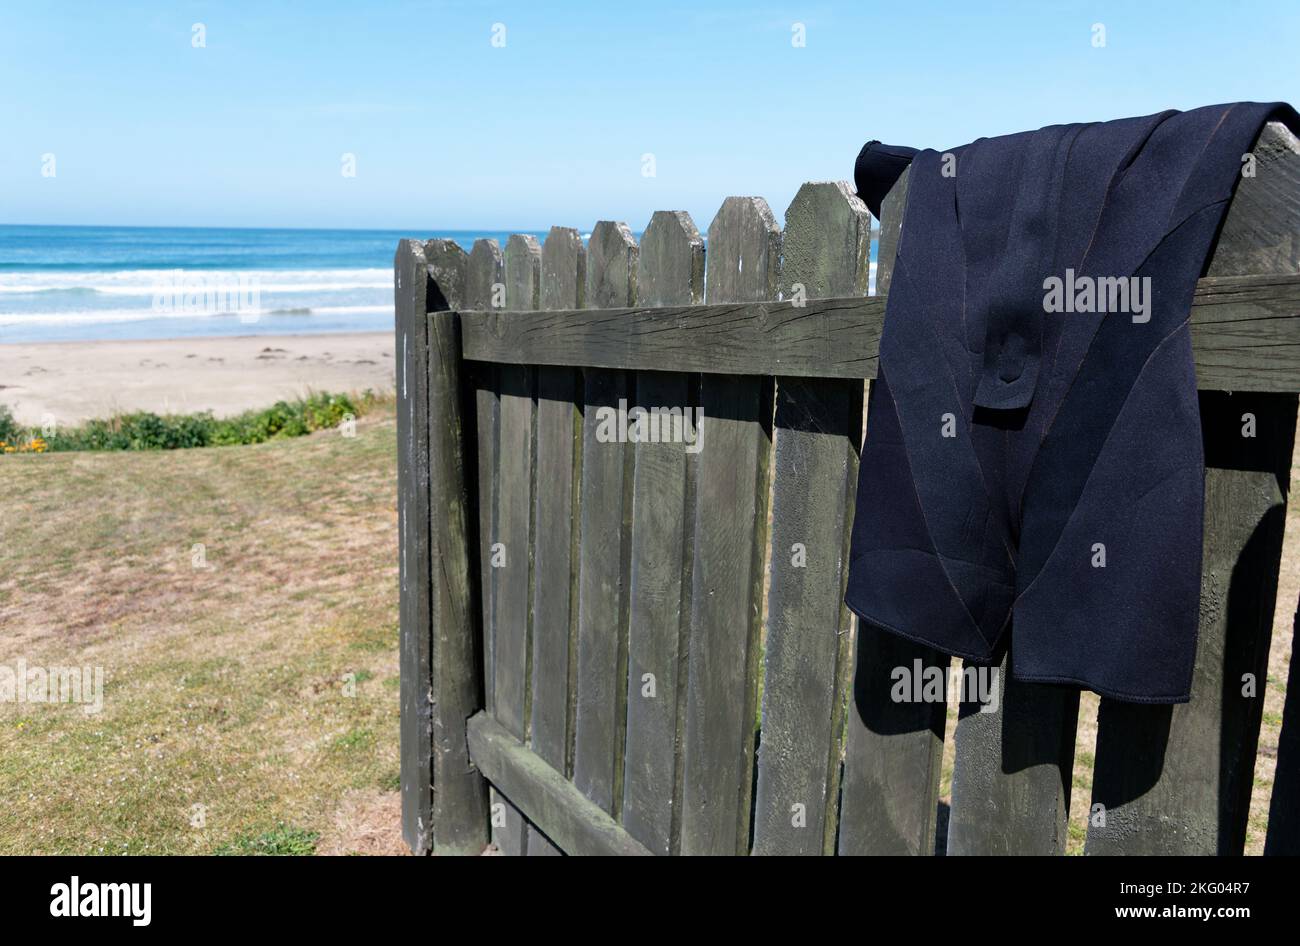 A shorty wetsuit is hanging on a fence to dry, its been having fun in the sea nearby. Stock Photo